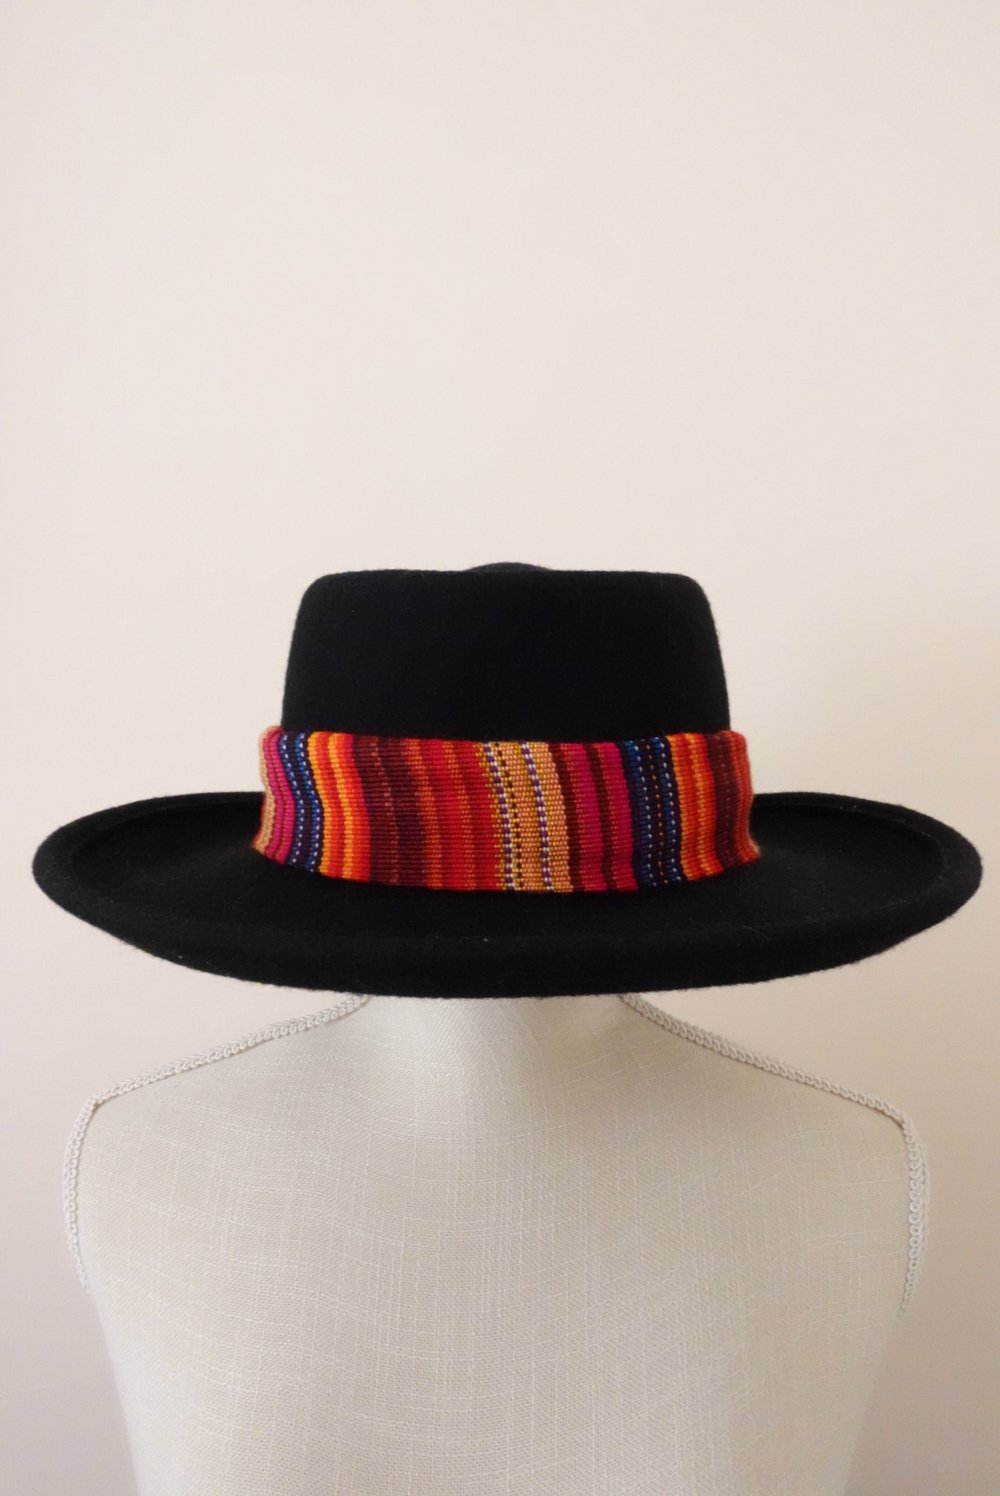  Tipico Wool Boater Hat